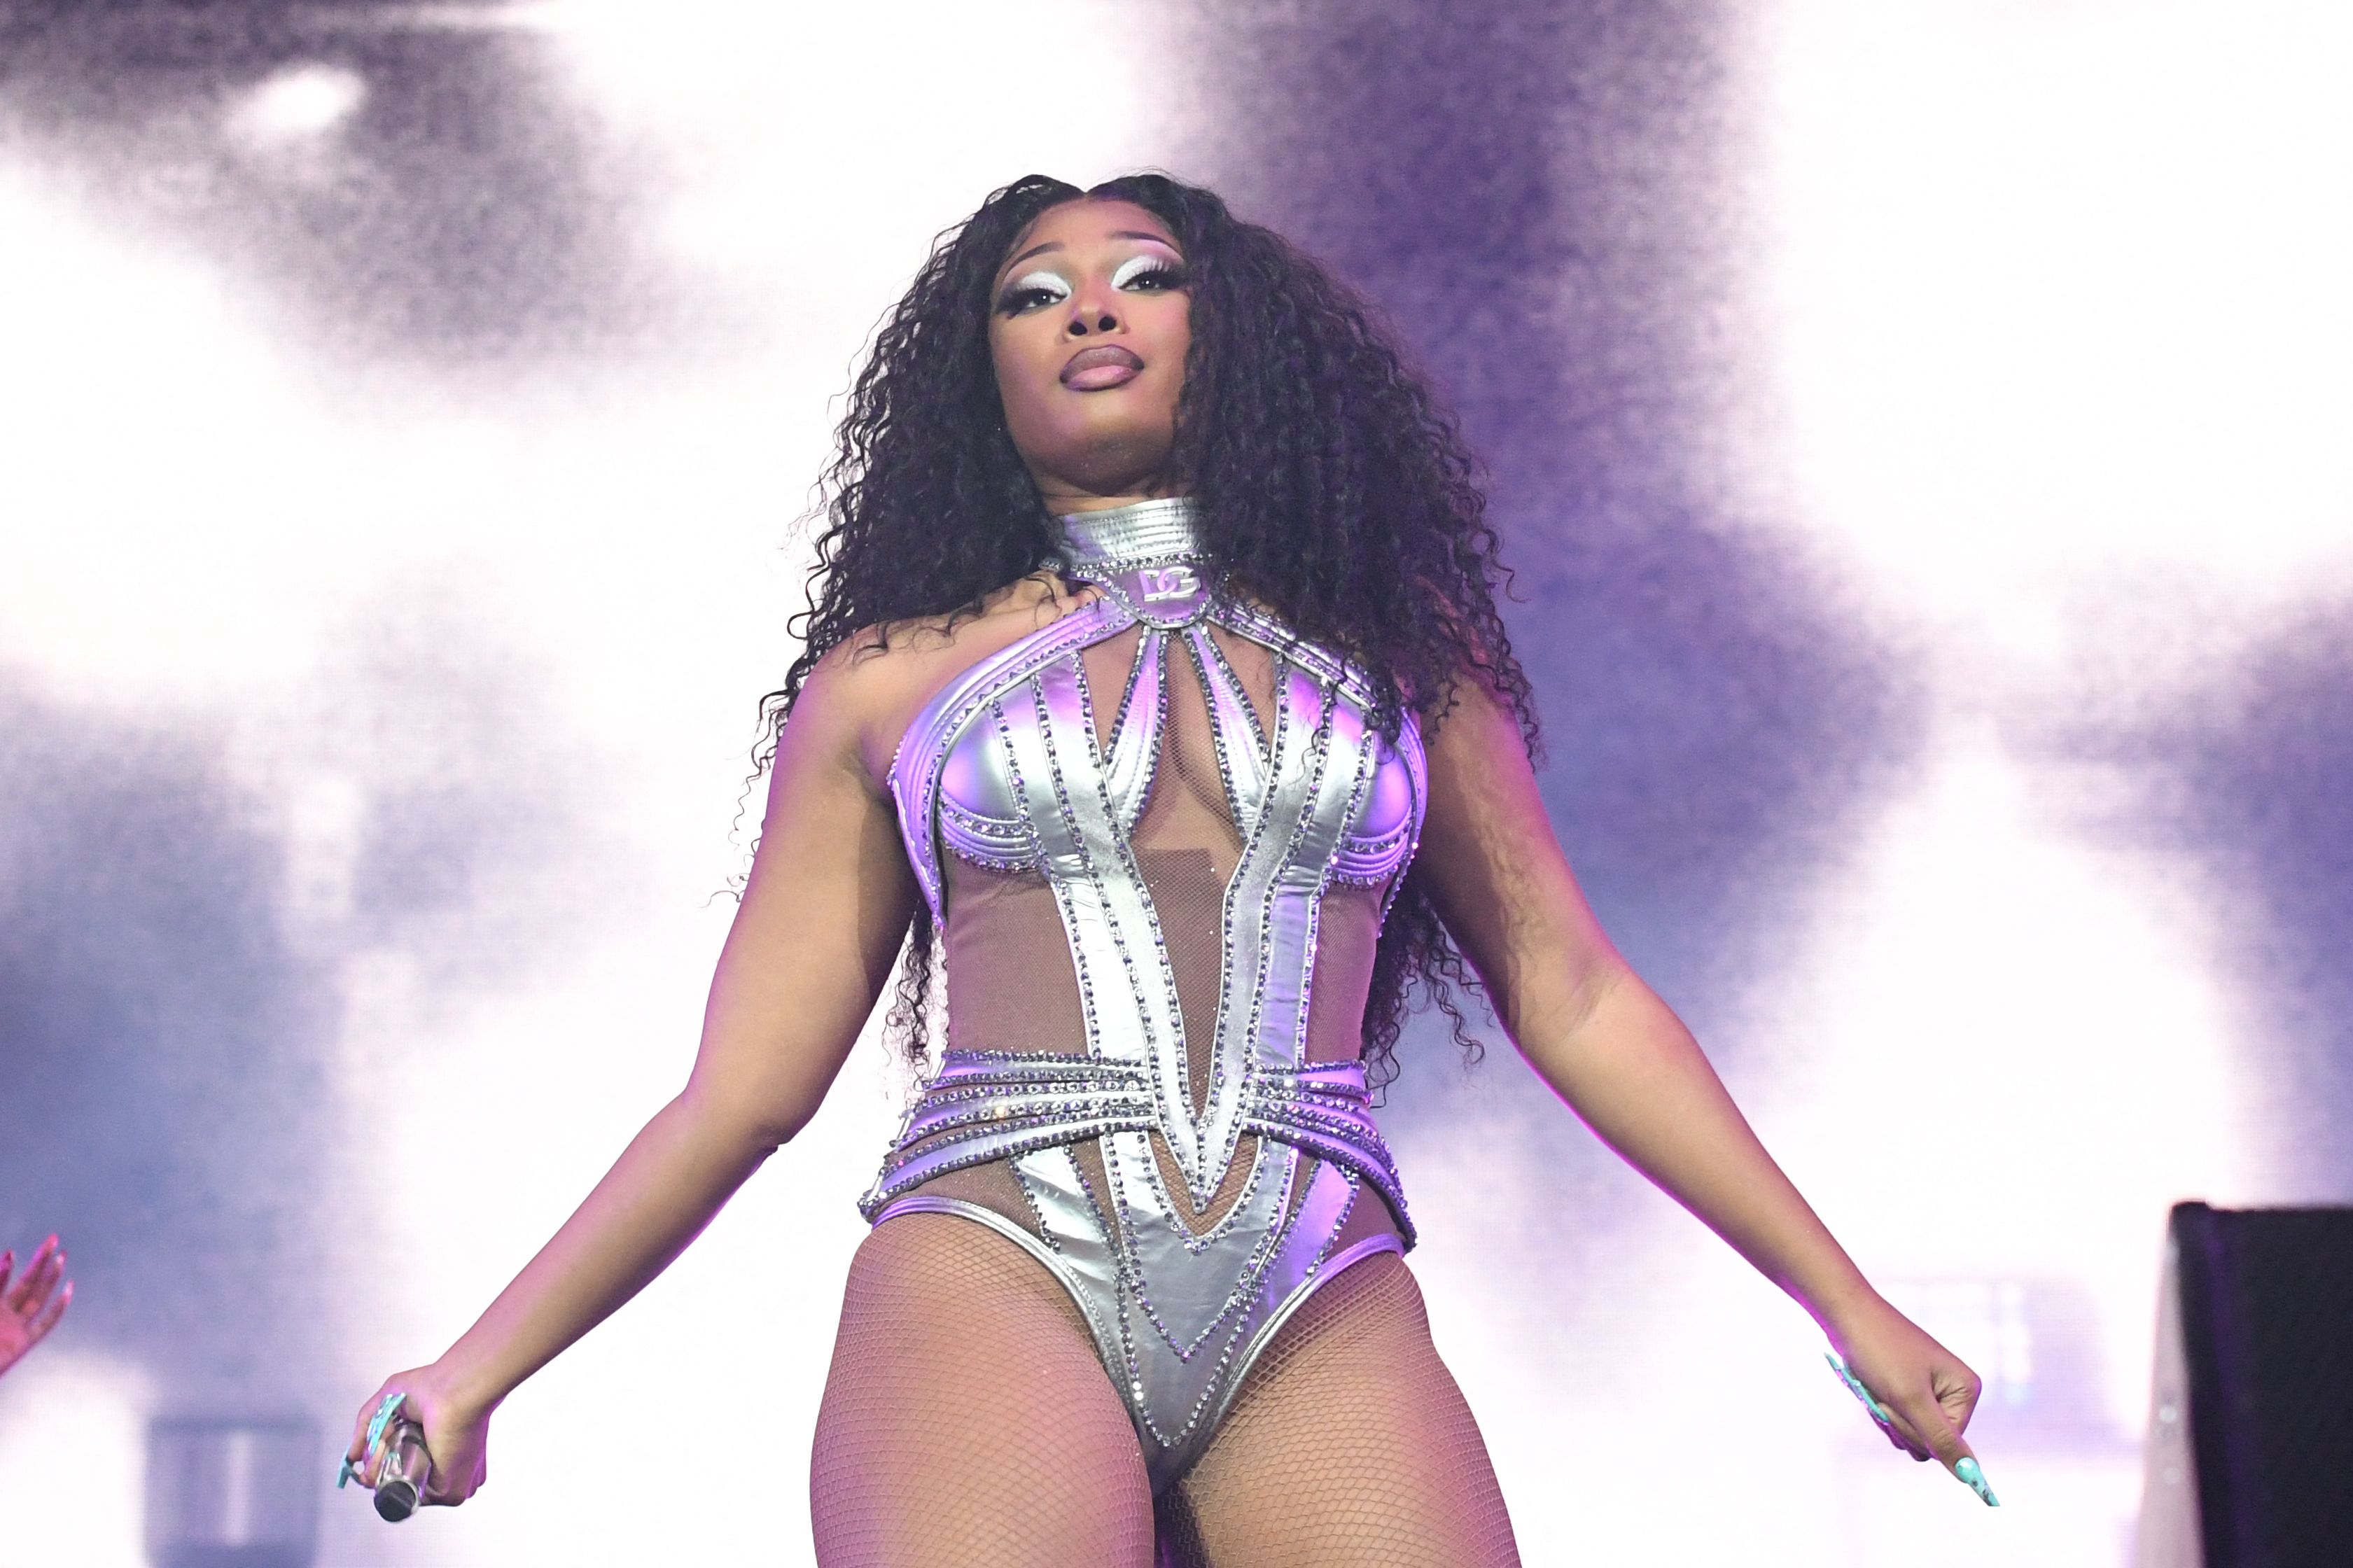 Megan Thee Stallion performs onstage at the Coachella Valley Music and Arts Festival